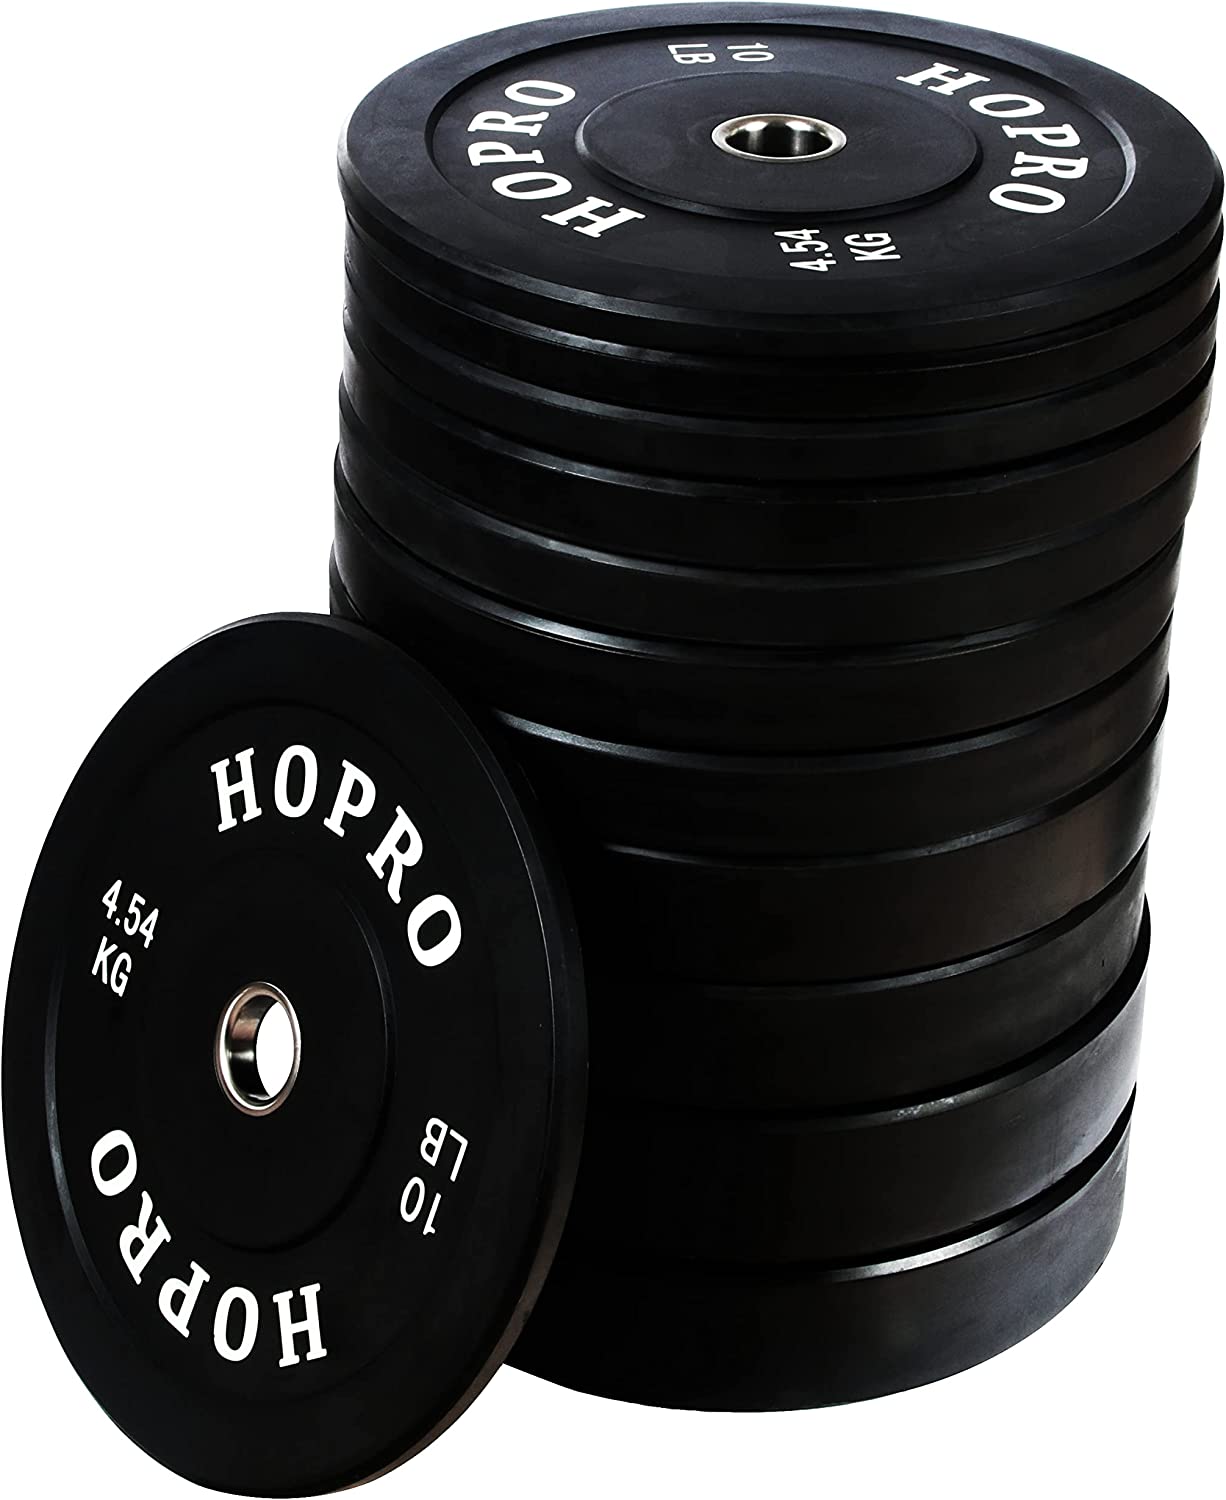 BalanceFrom HOPRO Olympic Bumper Plate Weight Plate with Steel Hub, Black, 370 lbs Set - image 3 of 3